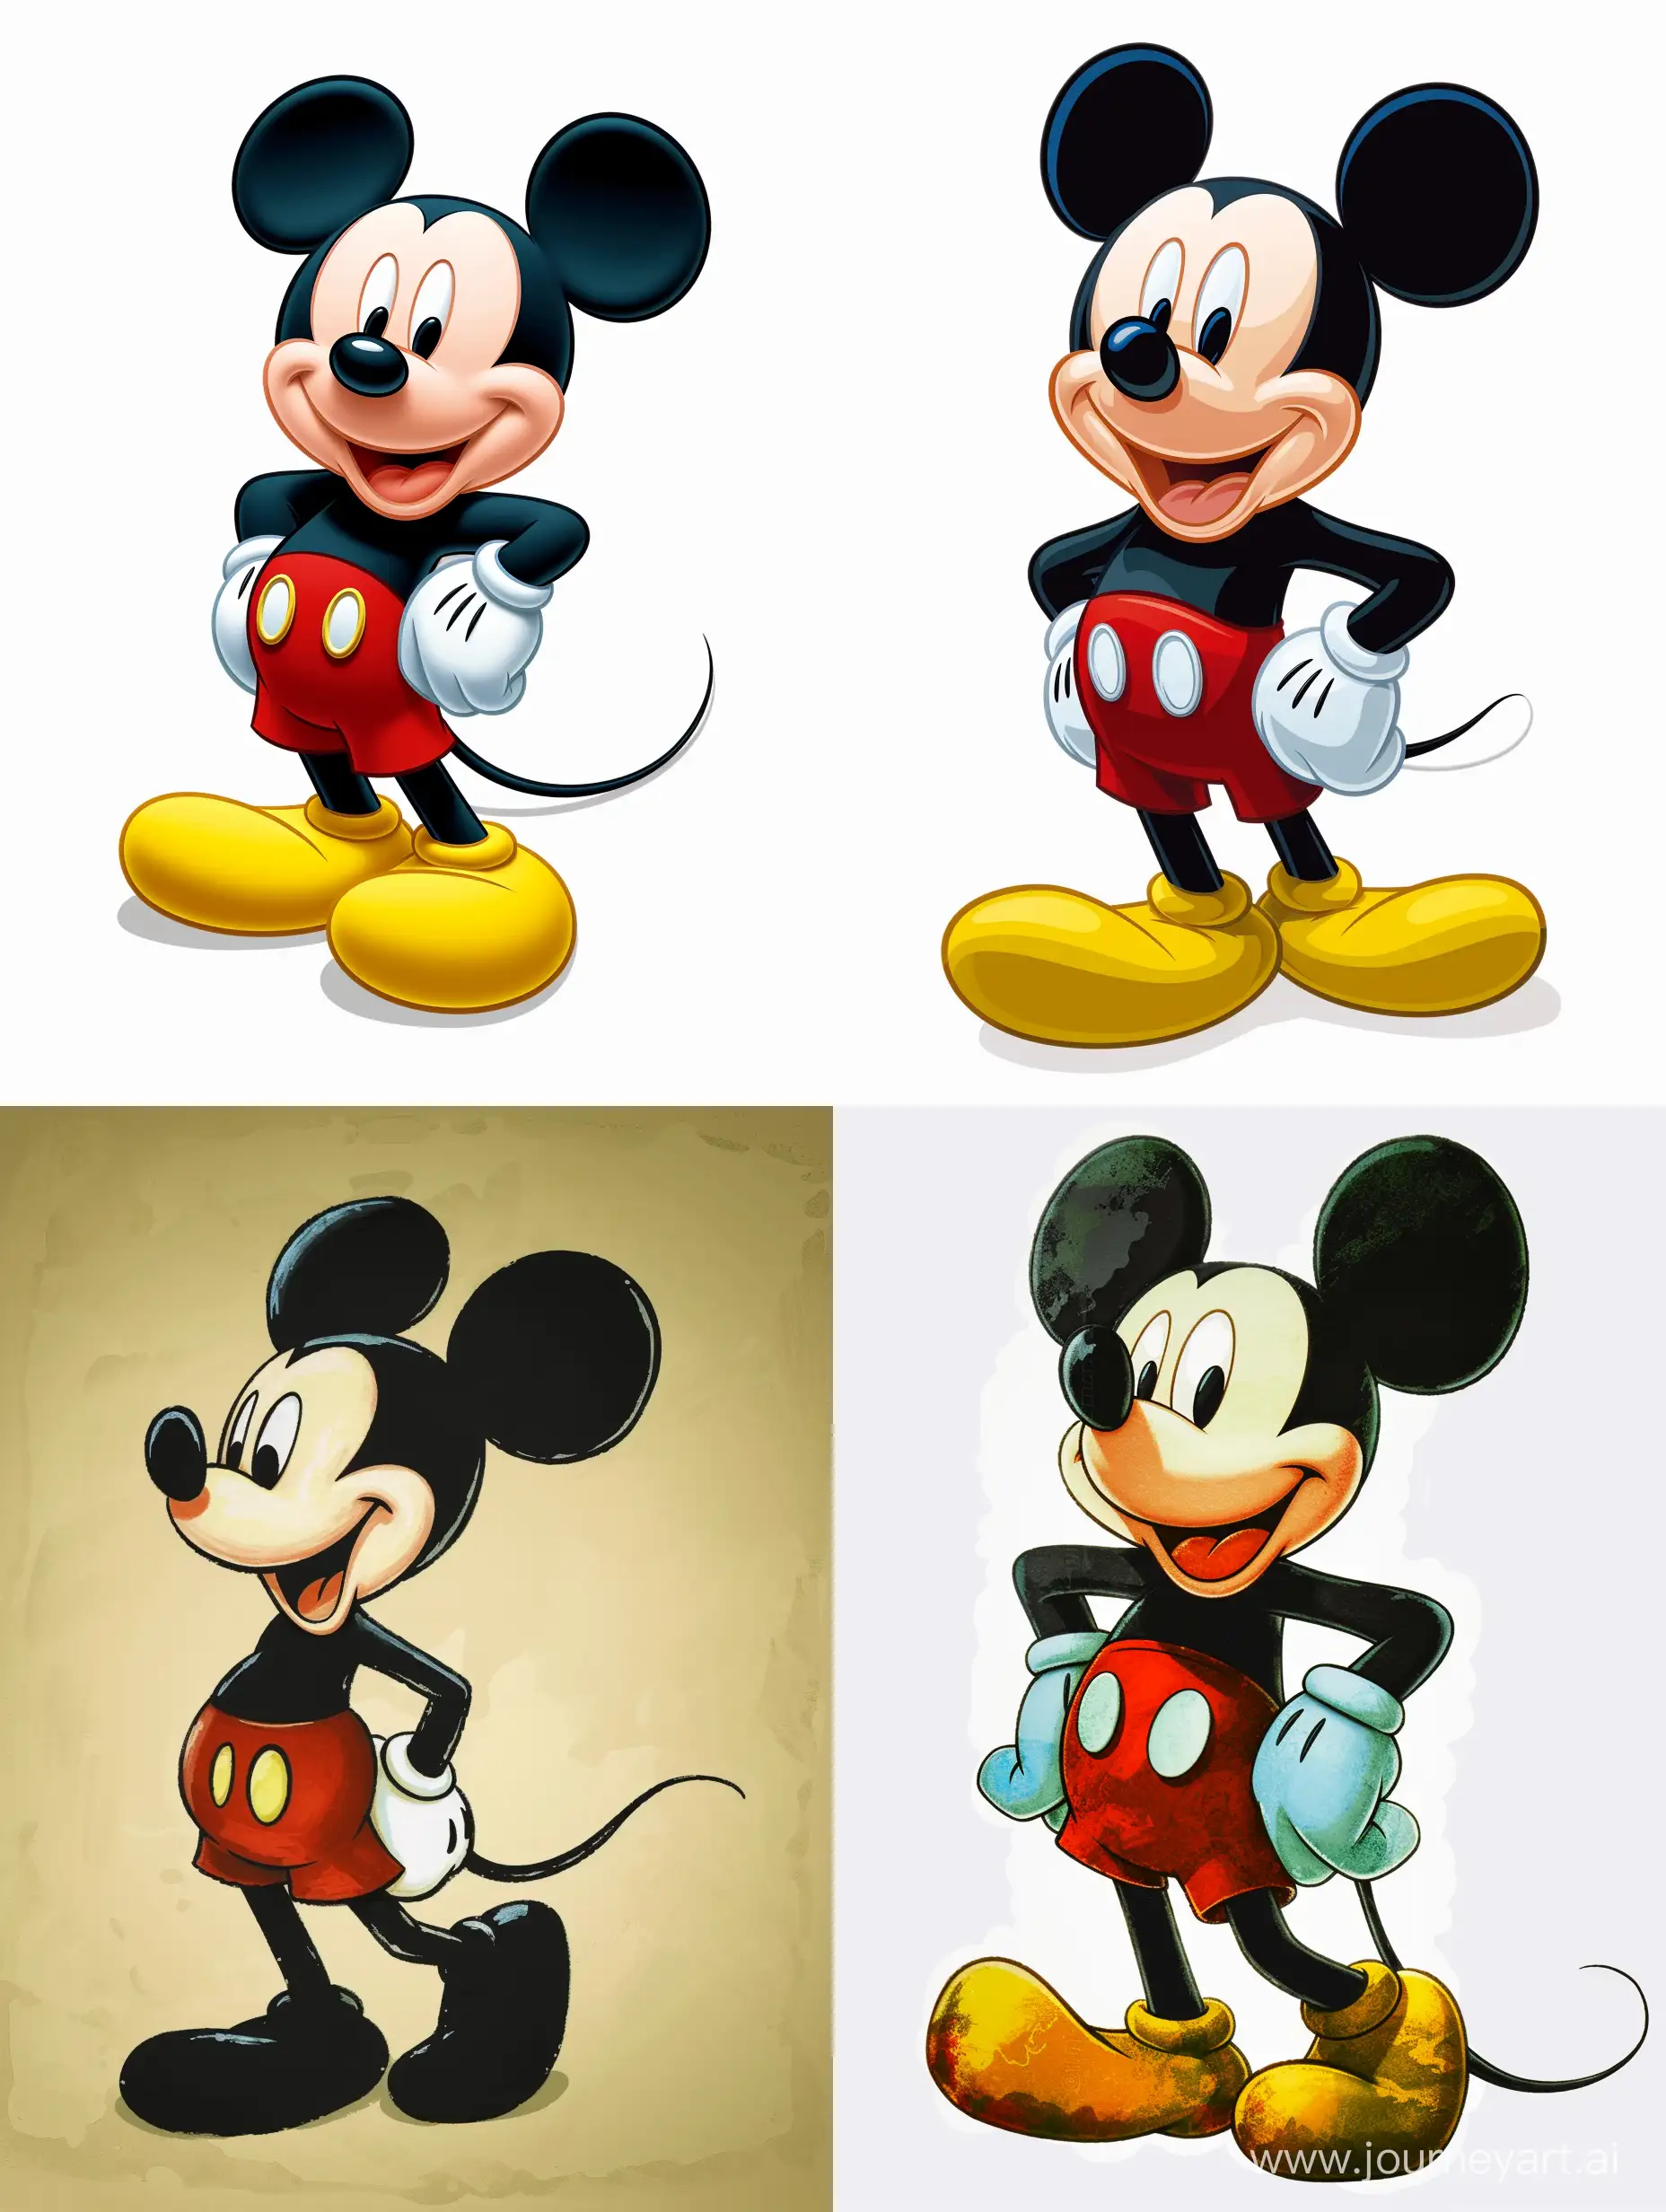 Cheerful-Mickey-Mouse-Cartoon-in-6th-Variation-Aspect-Ratio-34